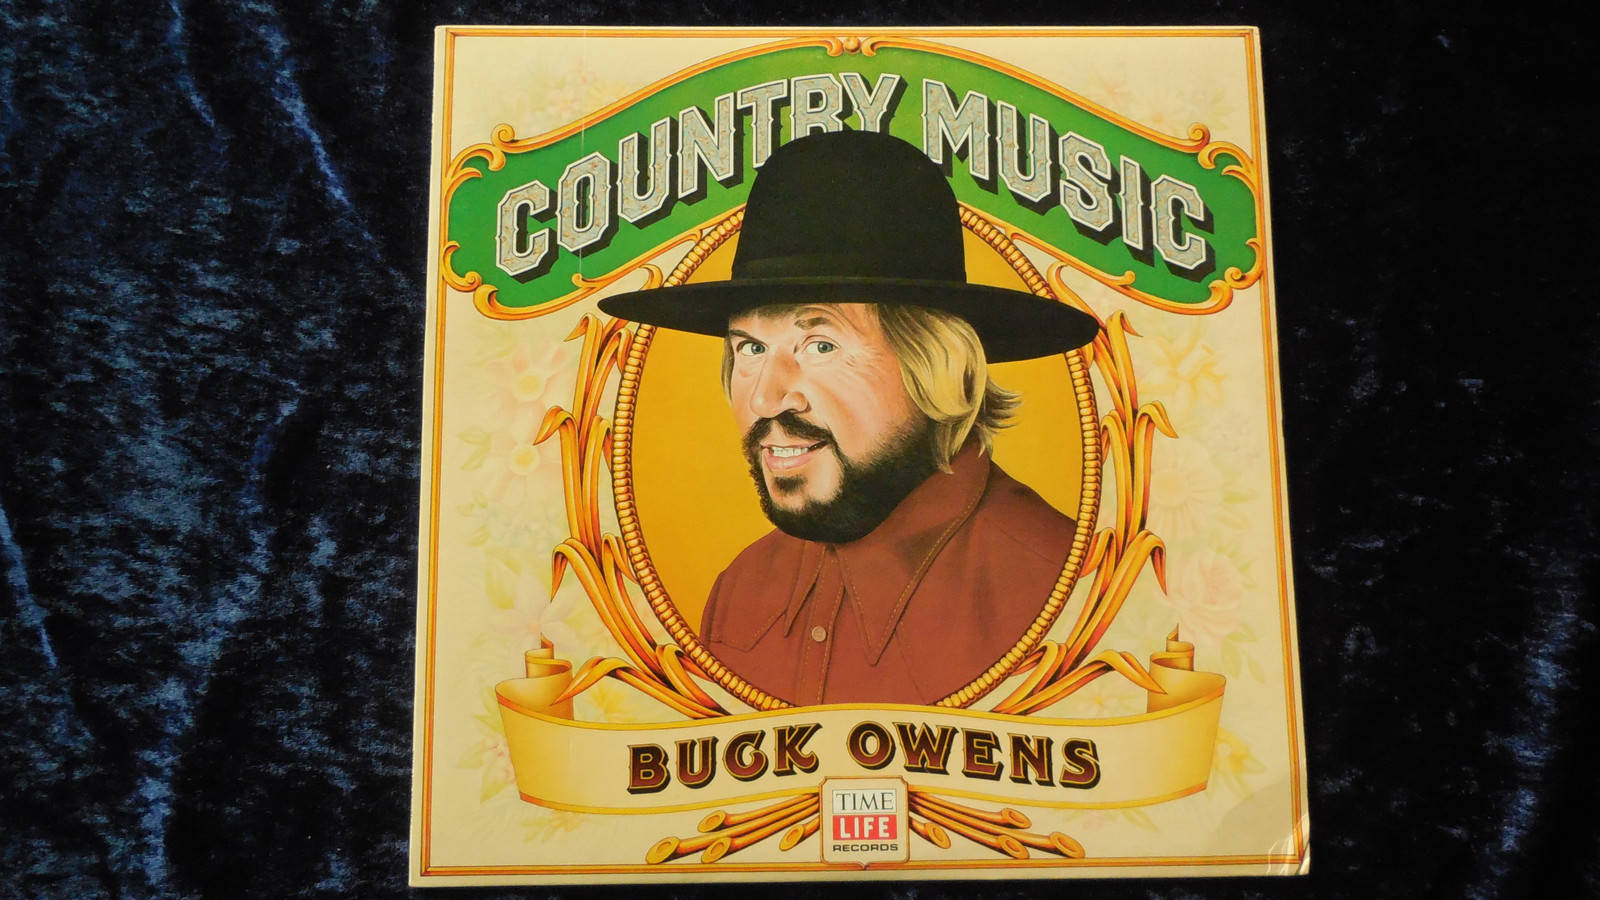 Buck Owens Country Music Time Life Records Wallpaper